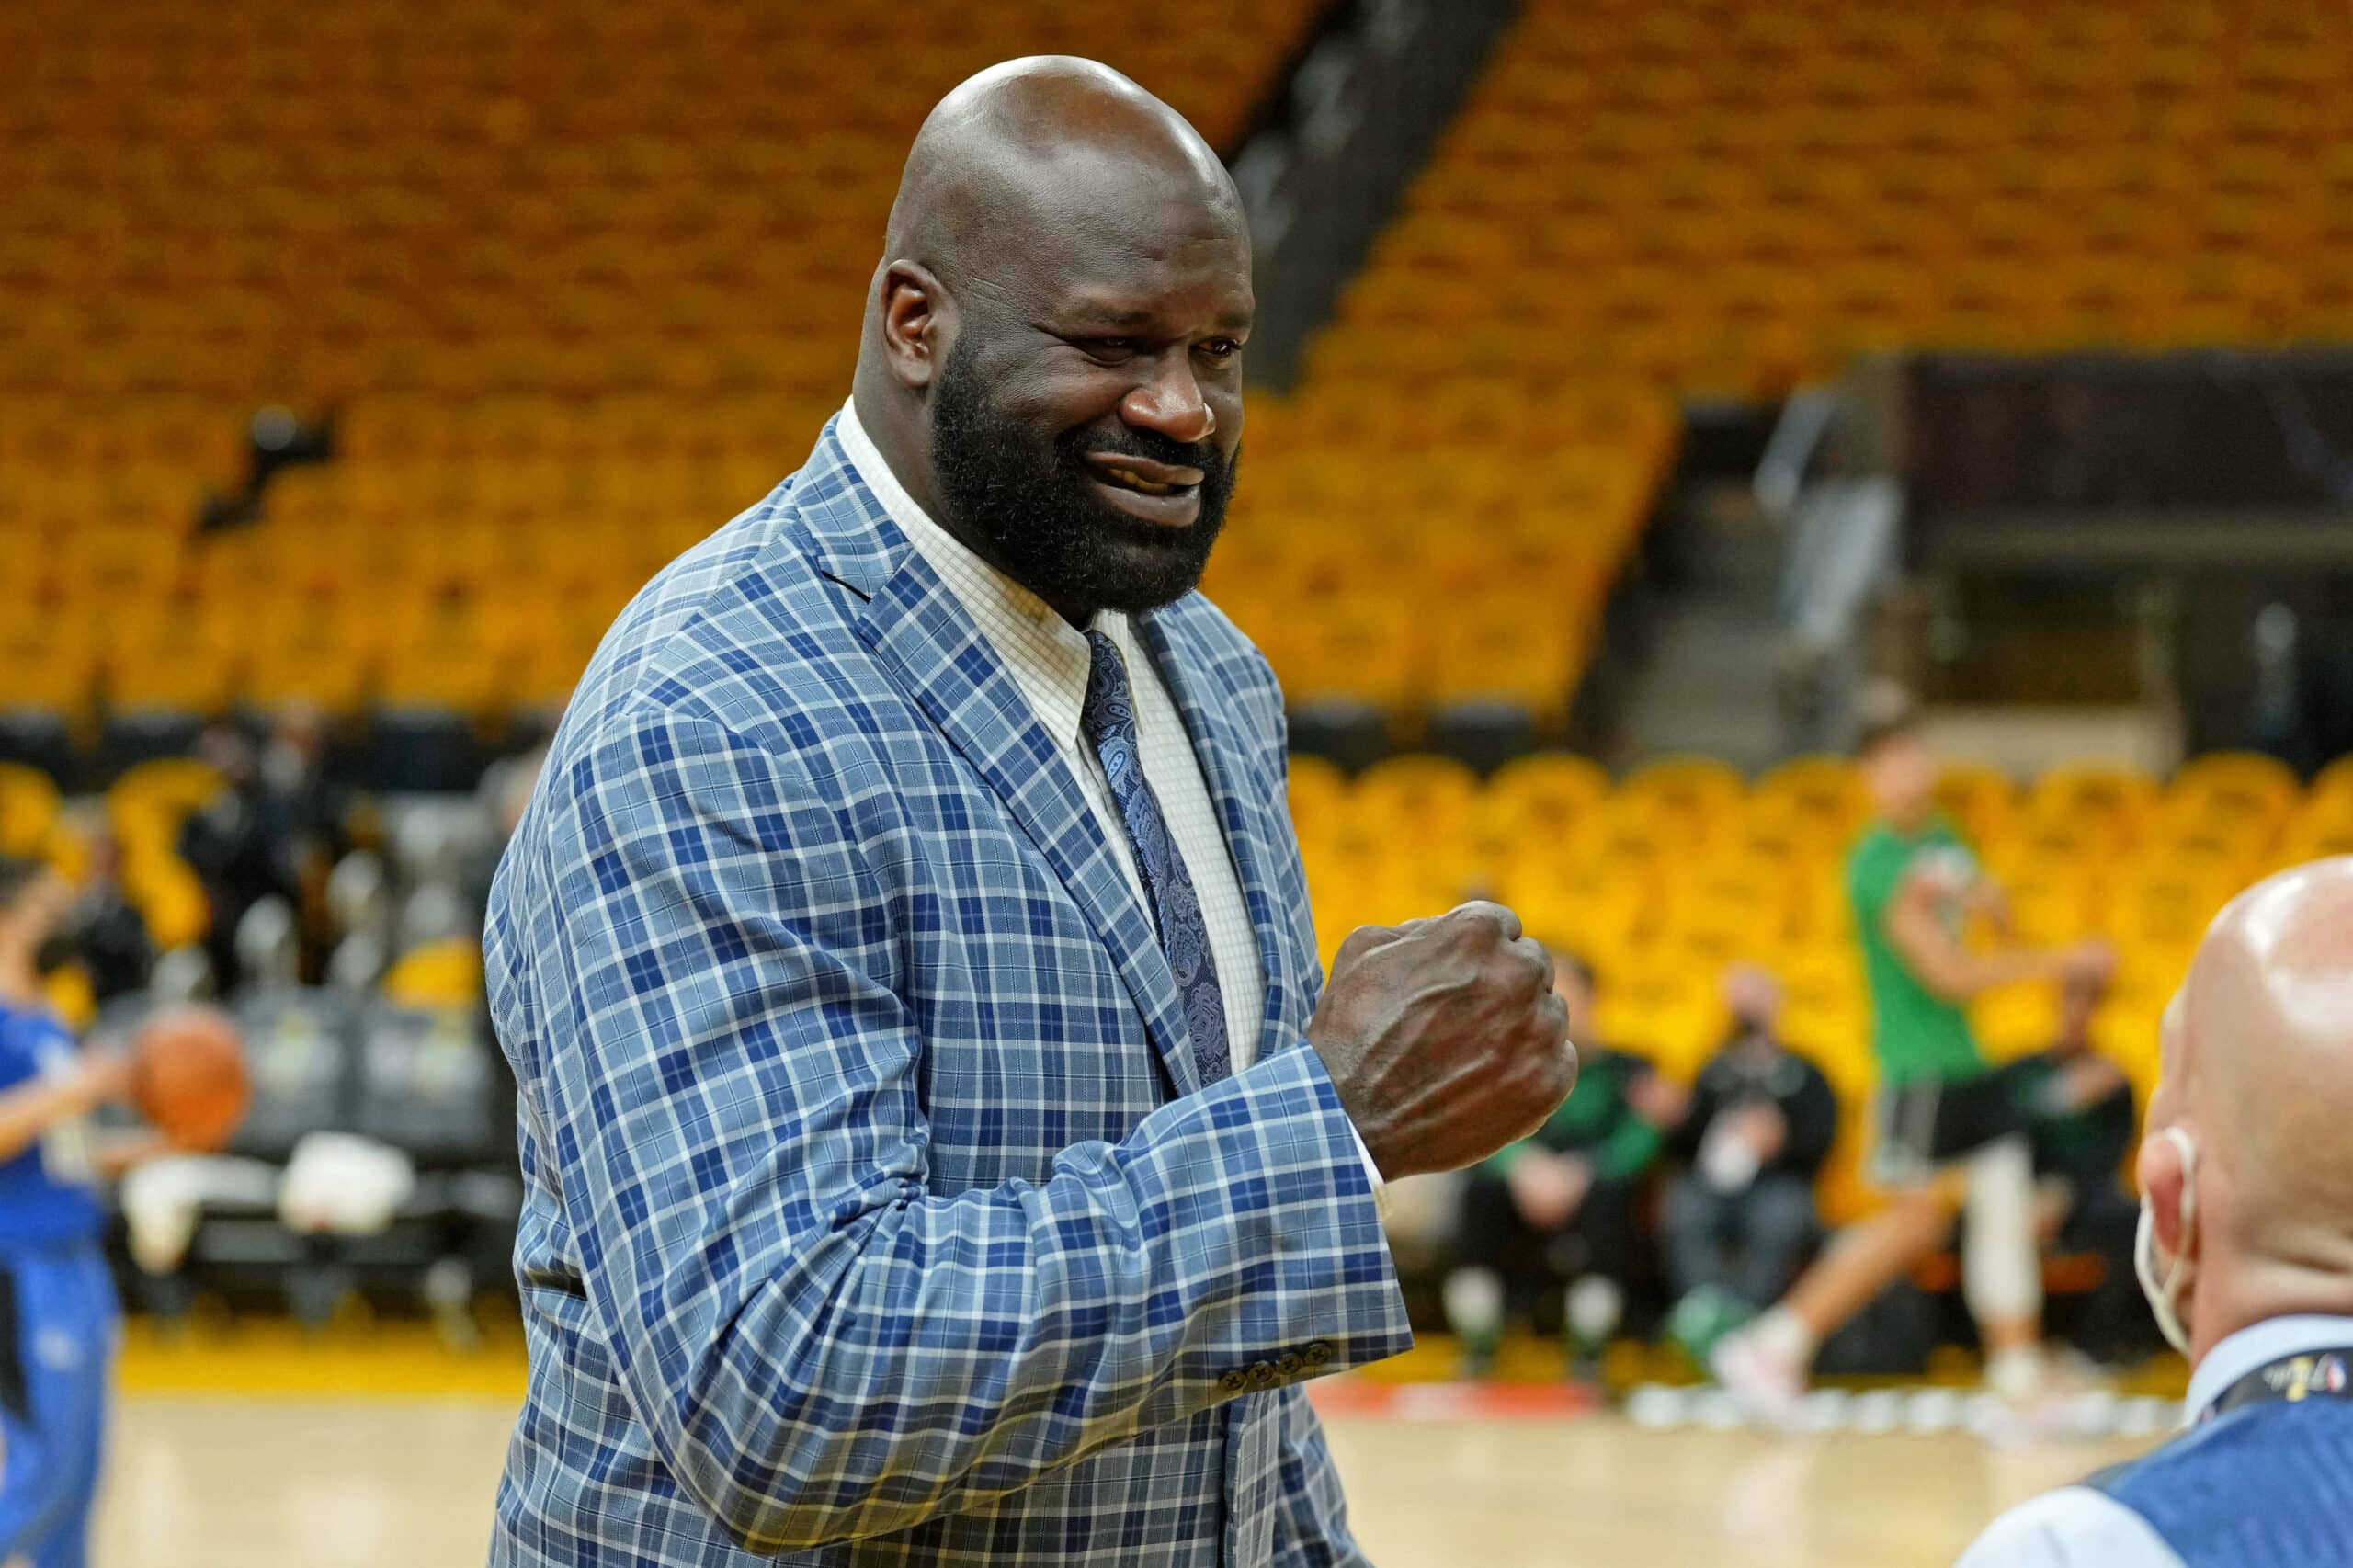 Shaquille O'Neal was served court papers in FTX case.